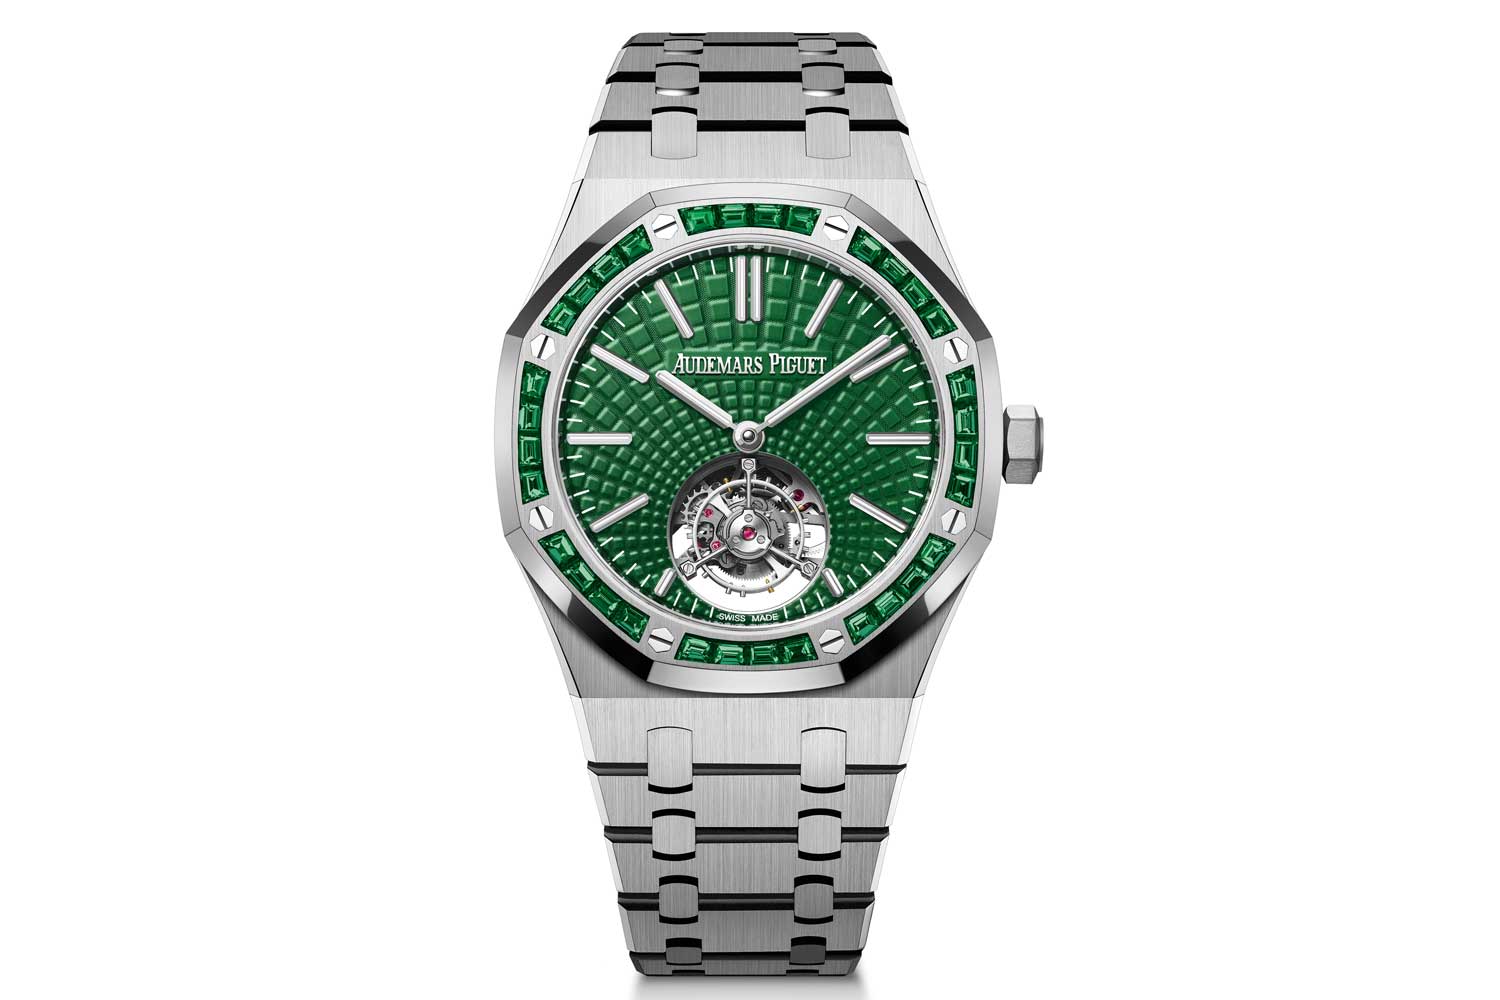 Royal Oak Tourbillon Extra-Thin ref. 26532IC which combines a titanium case and a white gold bezel set with baguette-cut emeralds with an emerald green dial